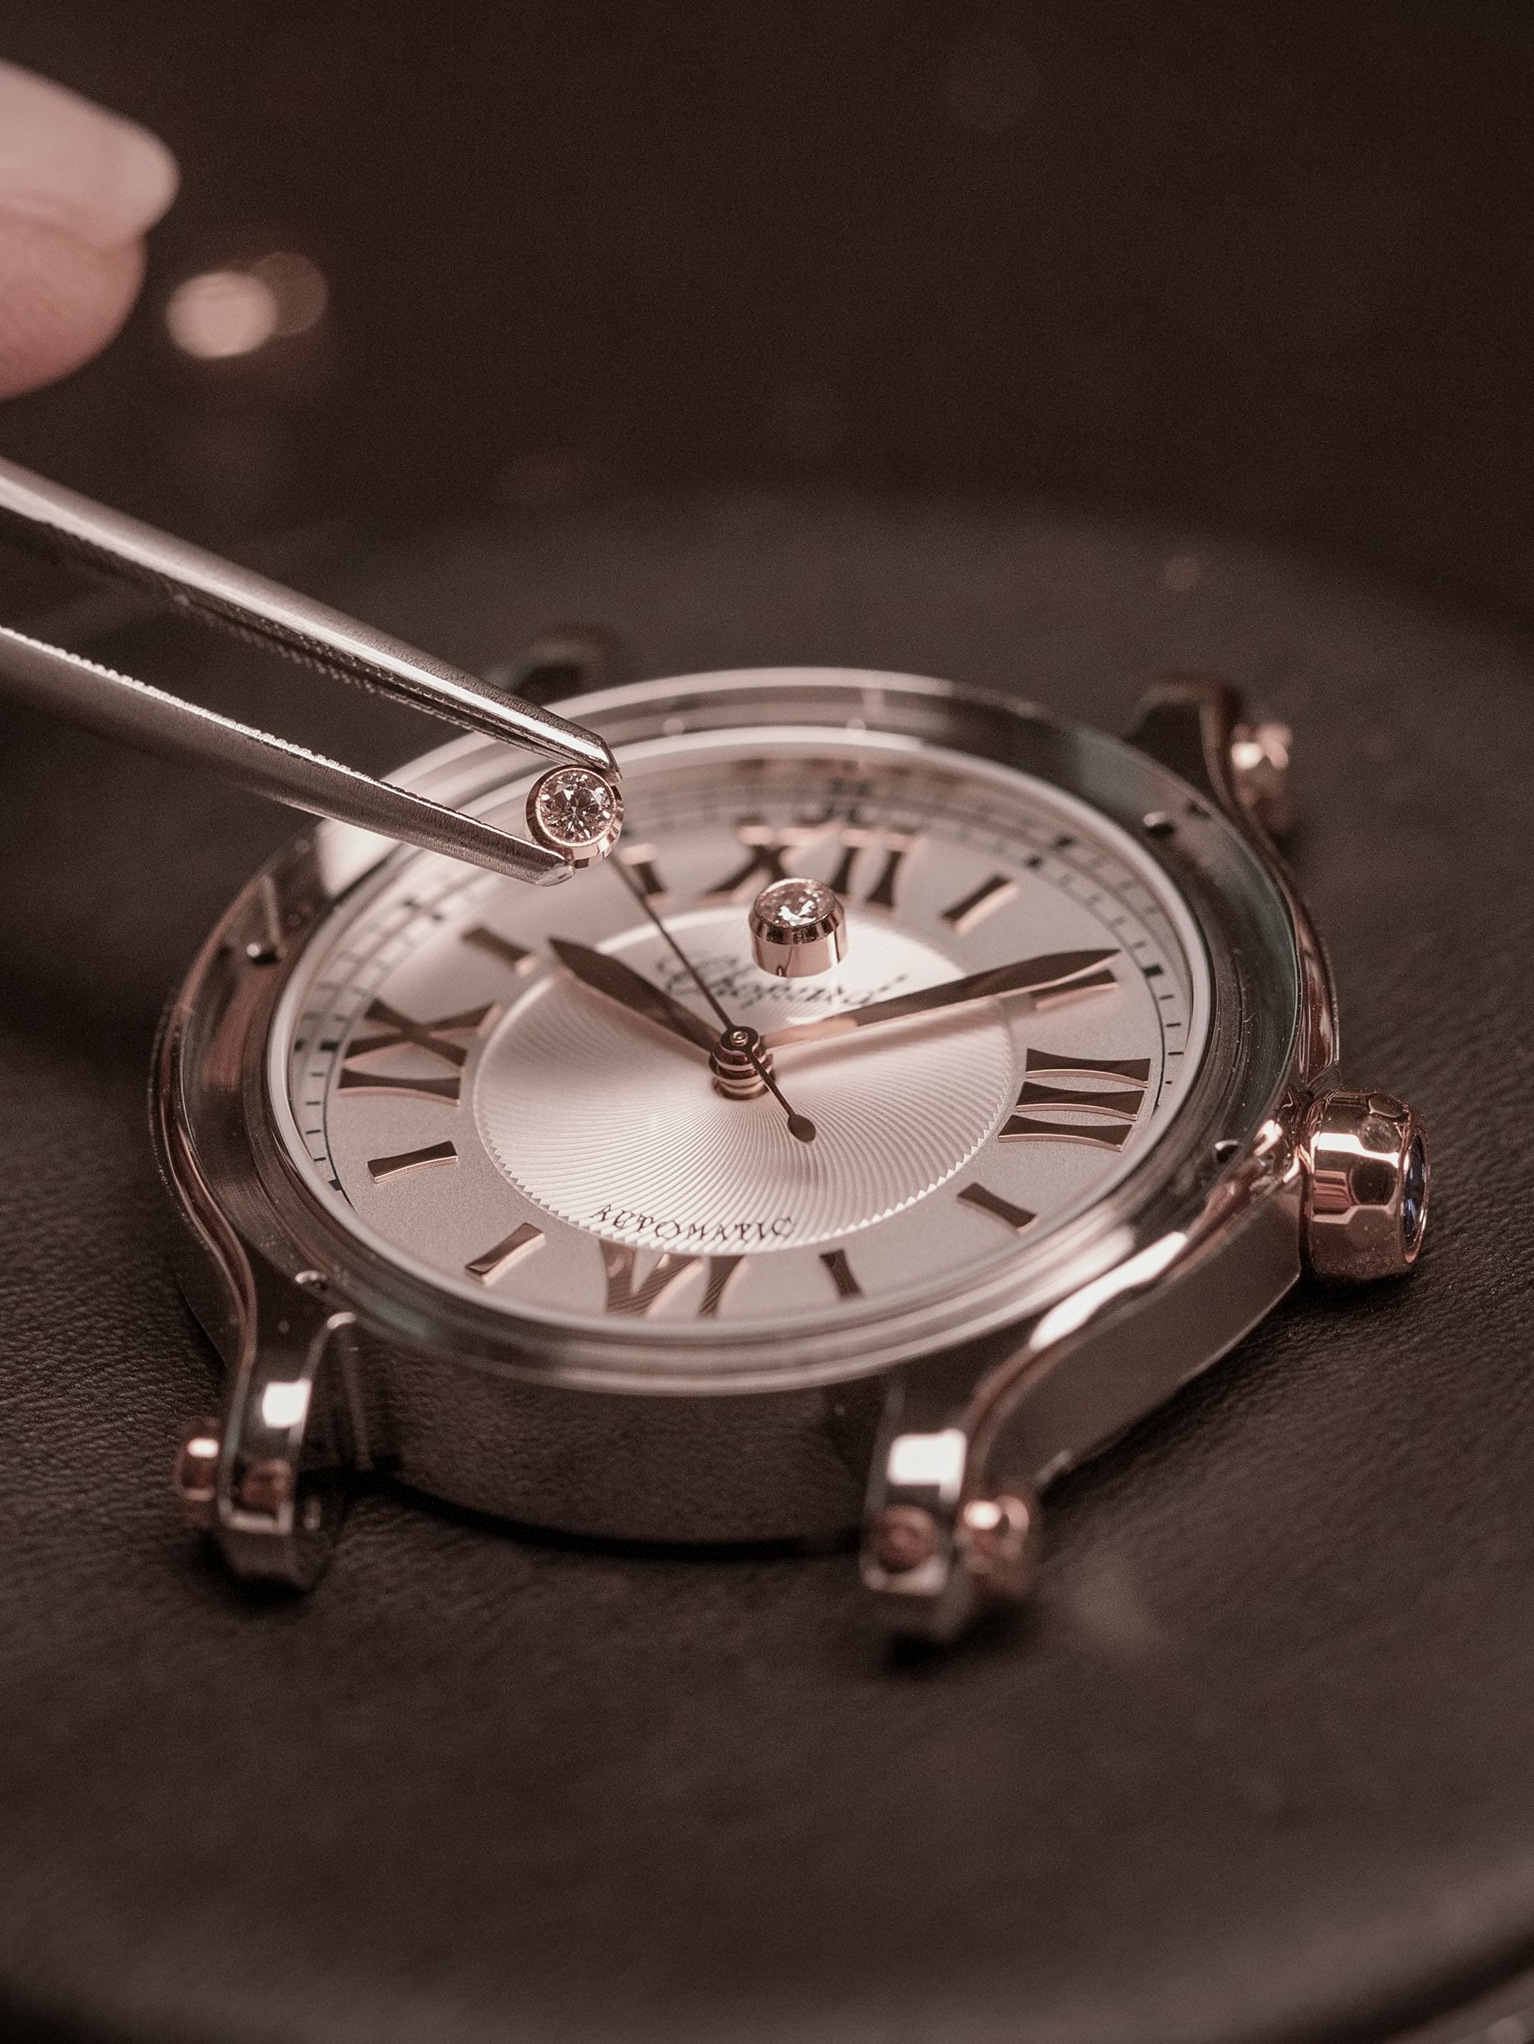 A floating diamonds watch dial